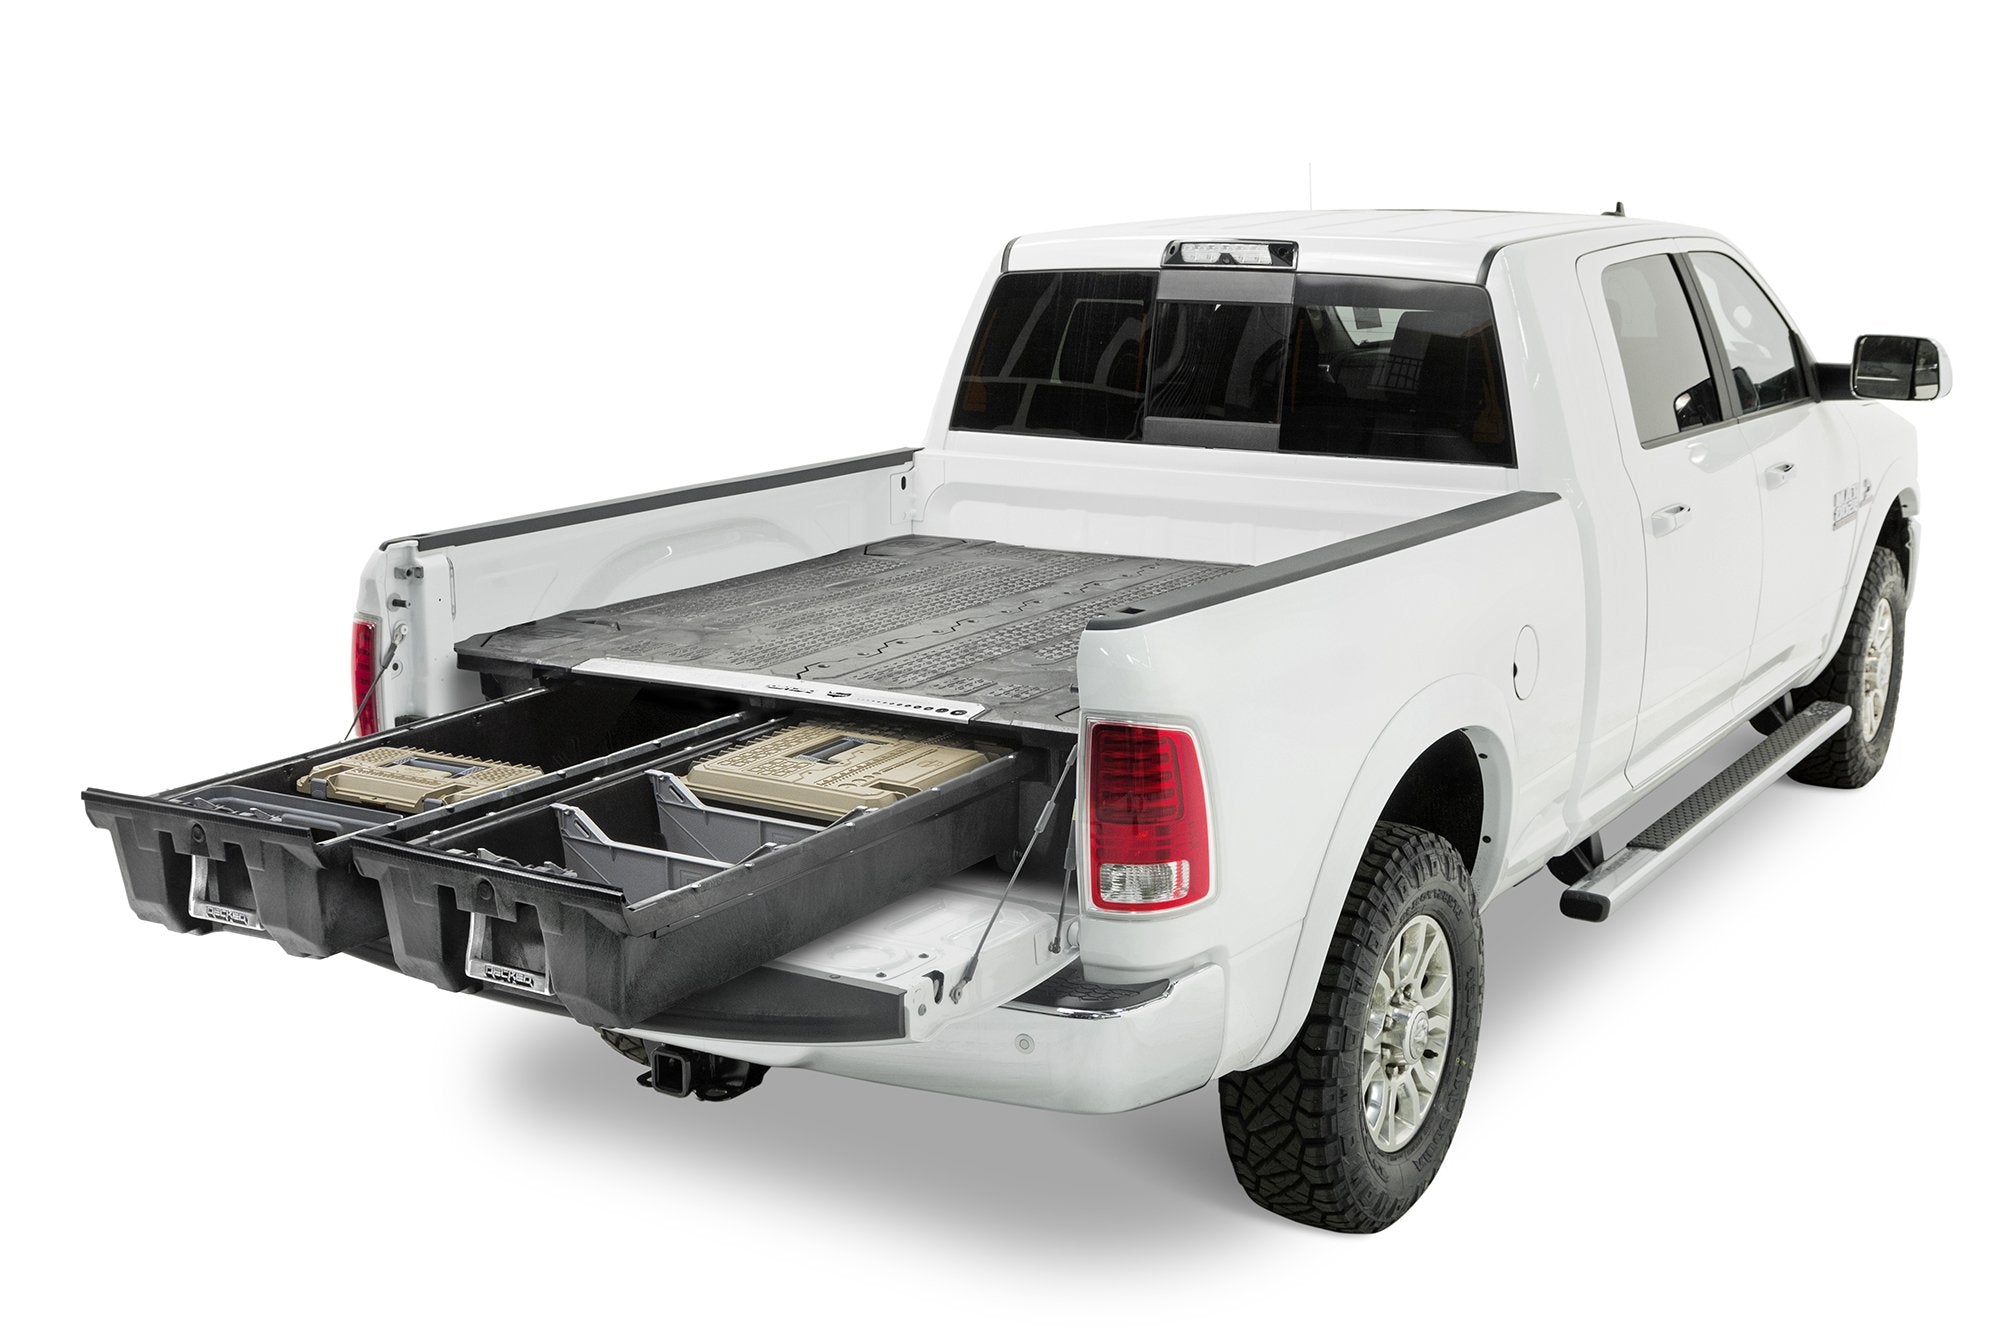 Ram 2500 Ram 3500 Truck Bed Storage System: Truck Bed Drawers DECKED  Truck Accessories